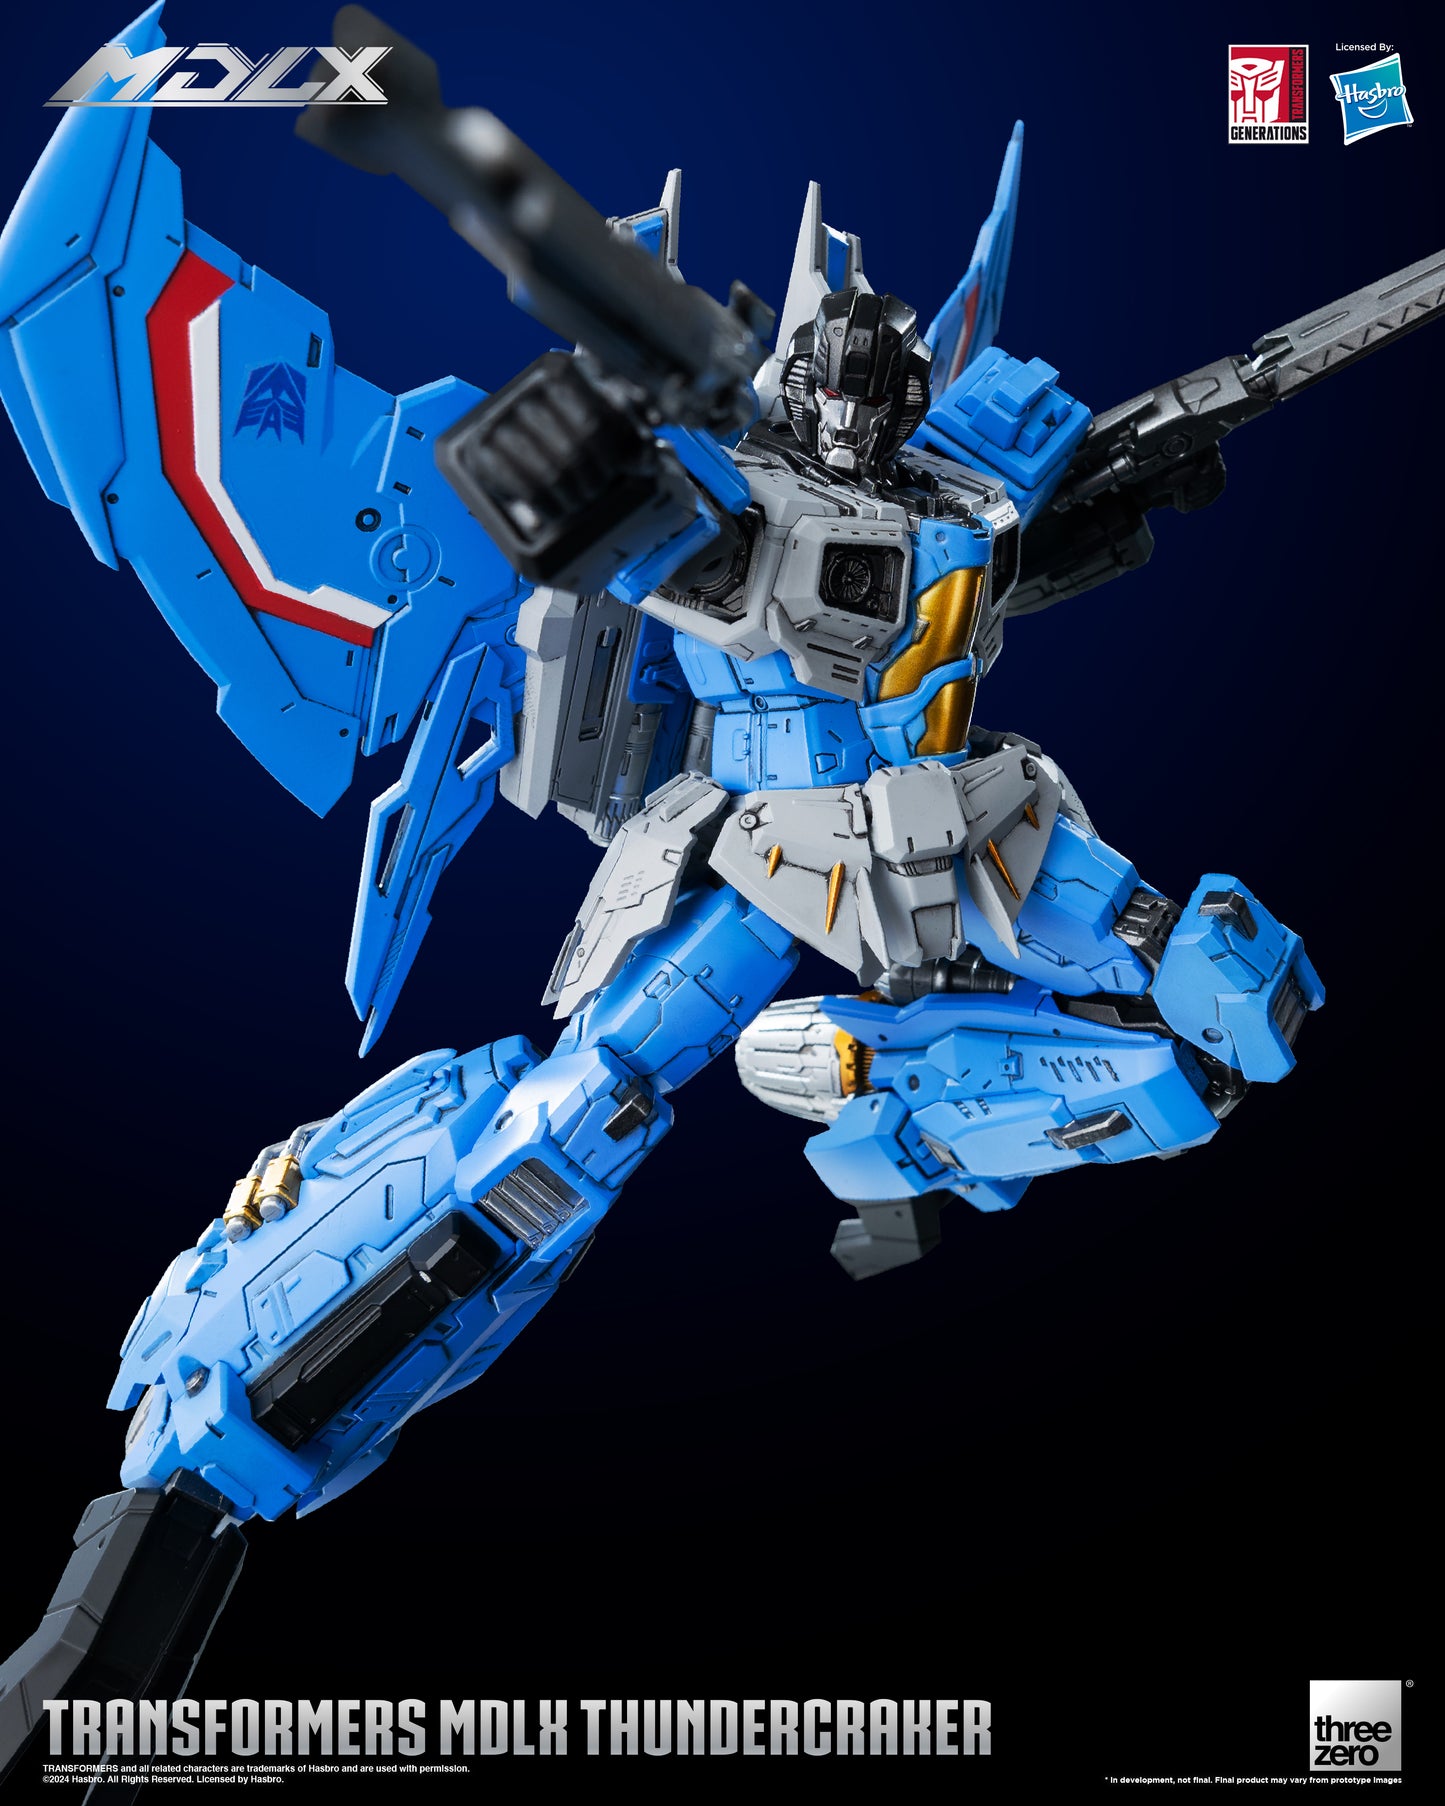 Transformers MDLX Articulated Figure Series Thundercracker right hand gun pointing flight pose